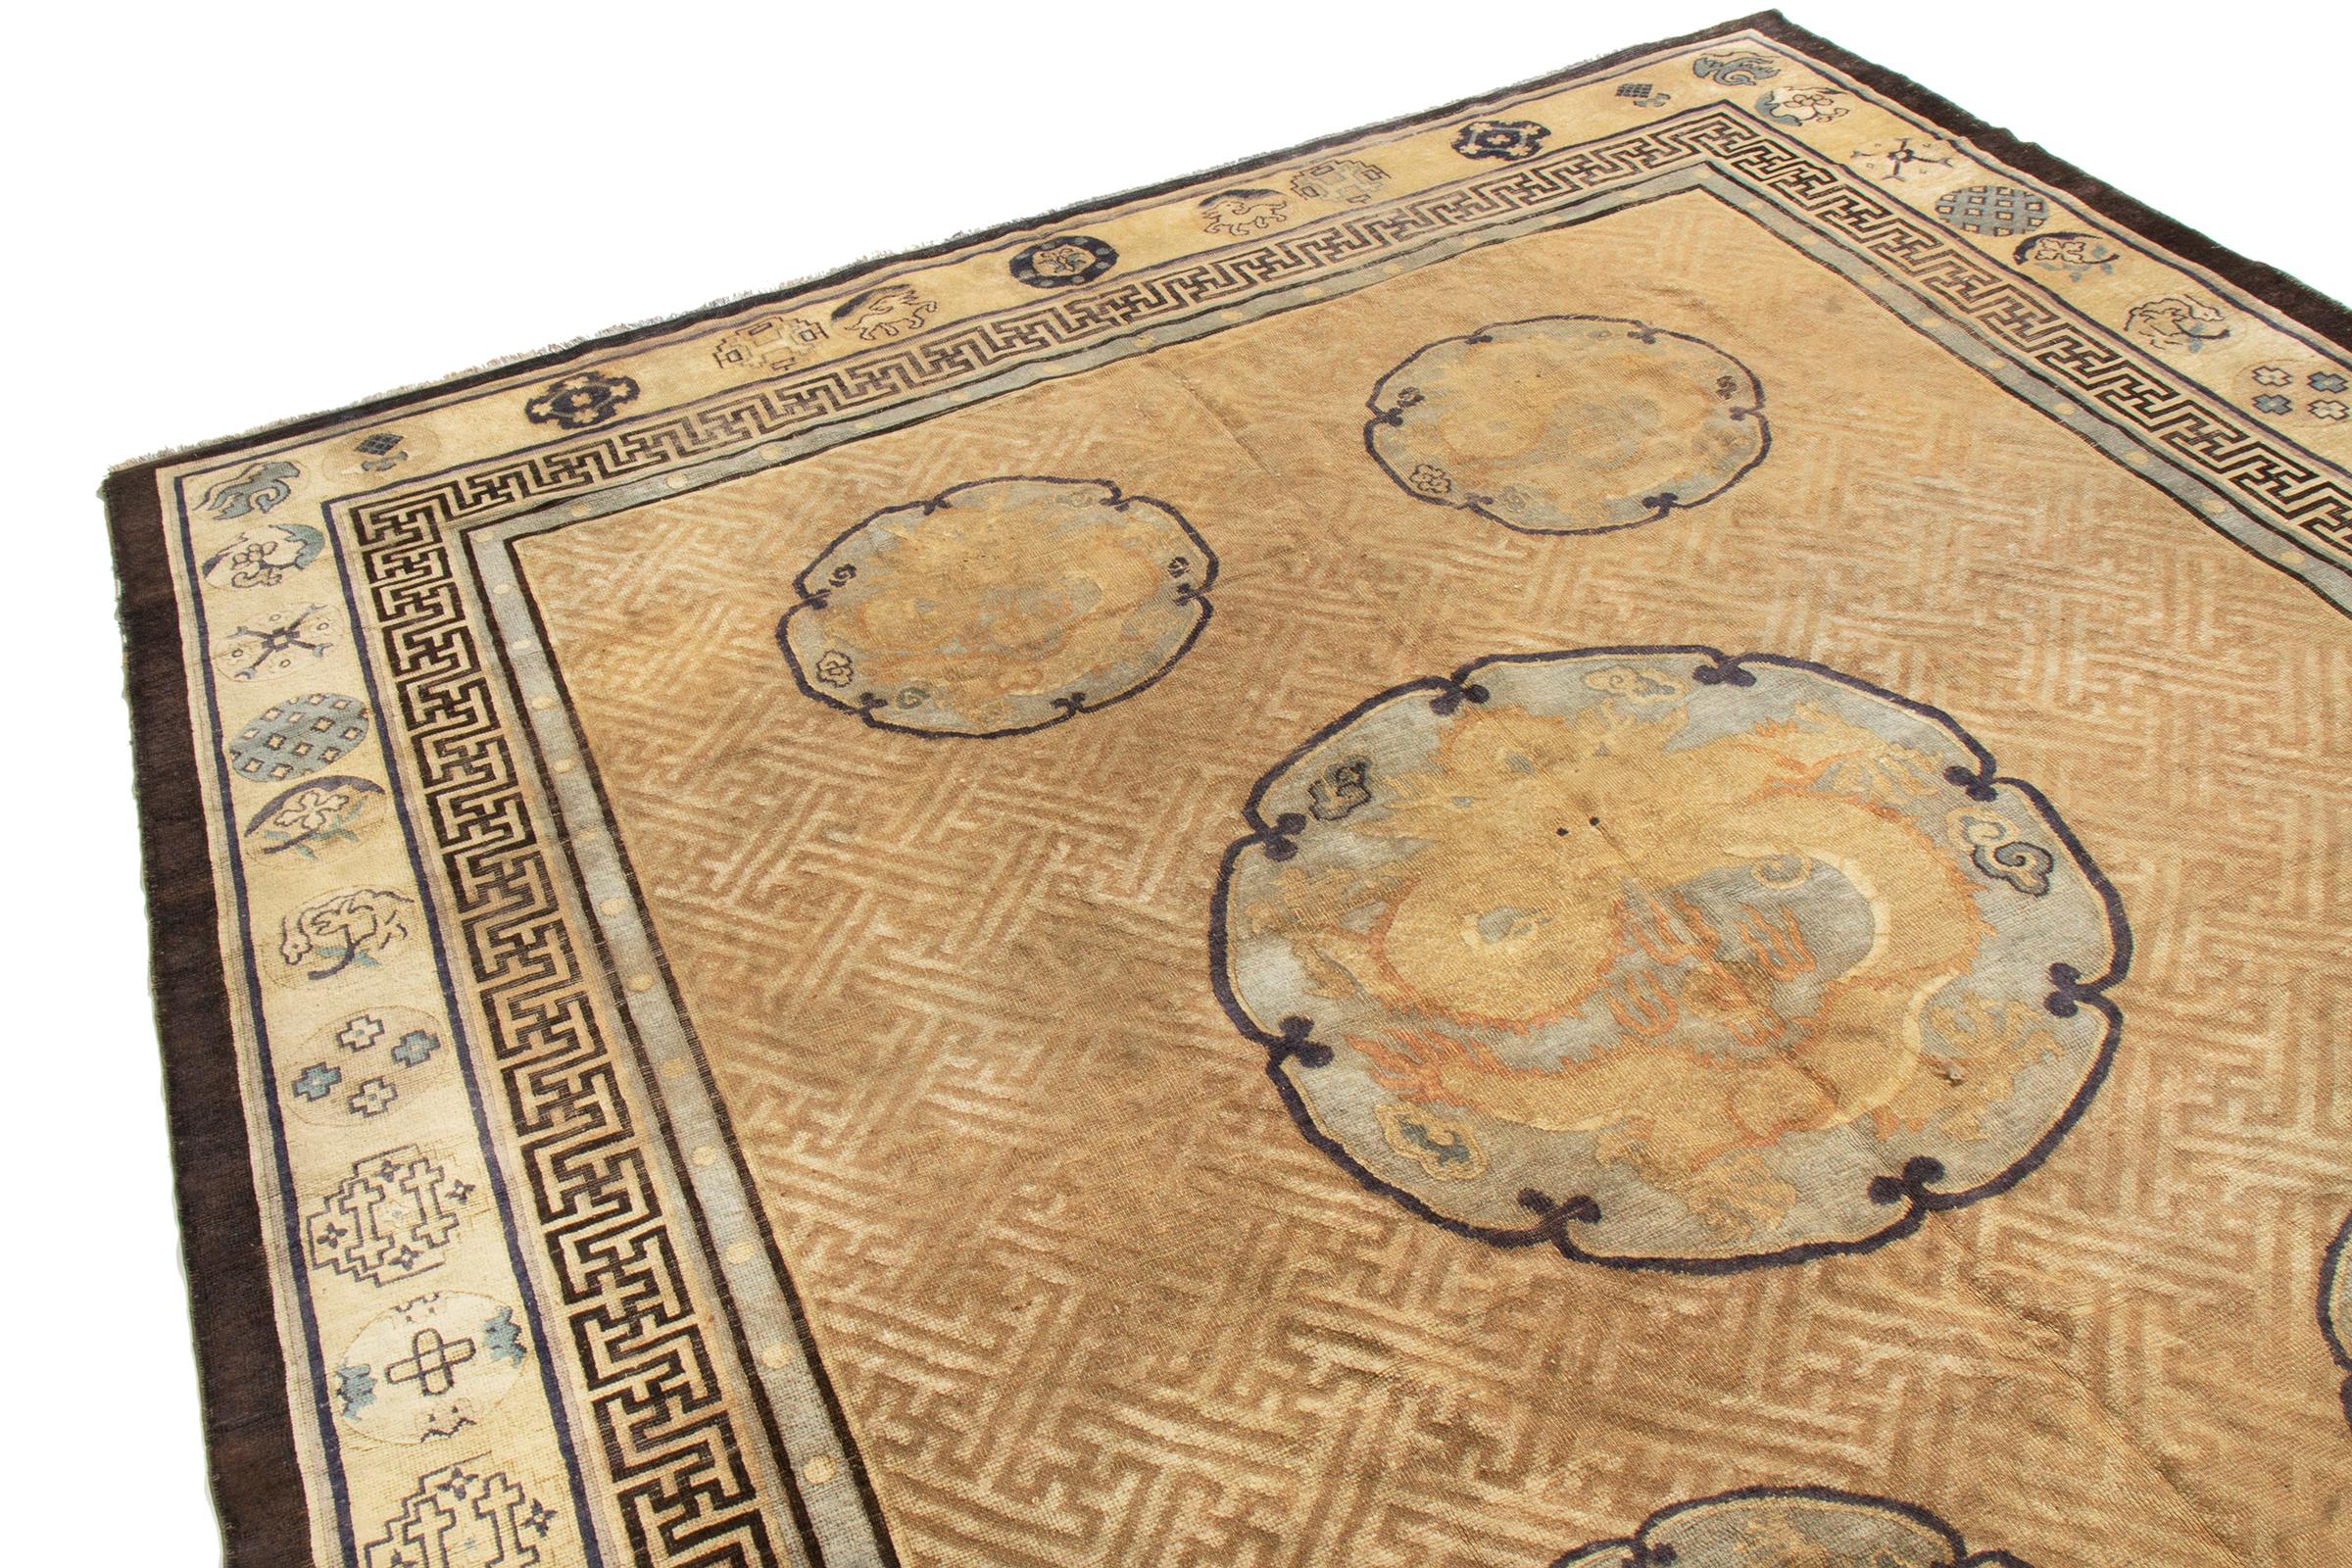 This antique traditional Indochinese floral rug has a culturally distinct combination of colors and imagery. The ornate medallion patterns of fearsome, rolling dragons are traditional symbols of power, honor, and dignity. The color plays into the